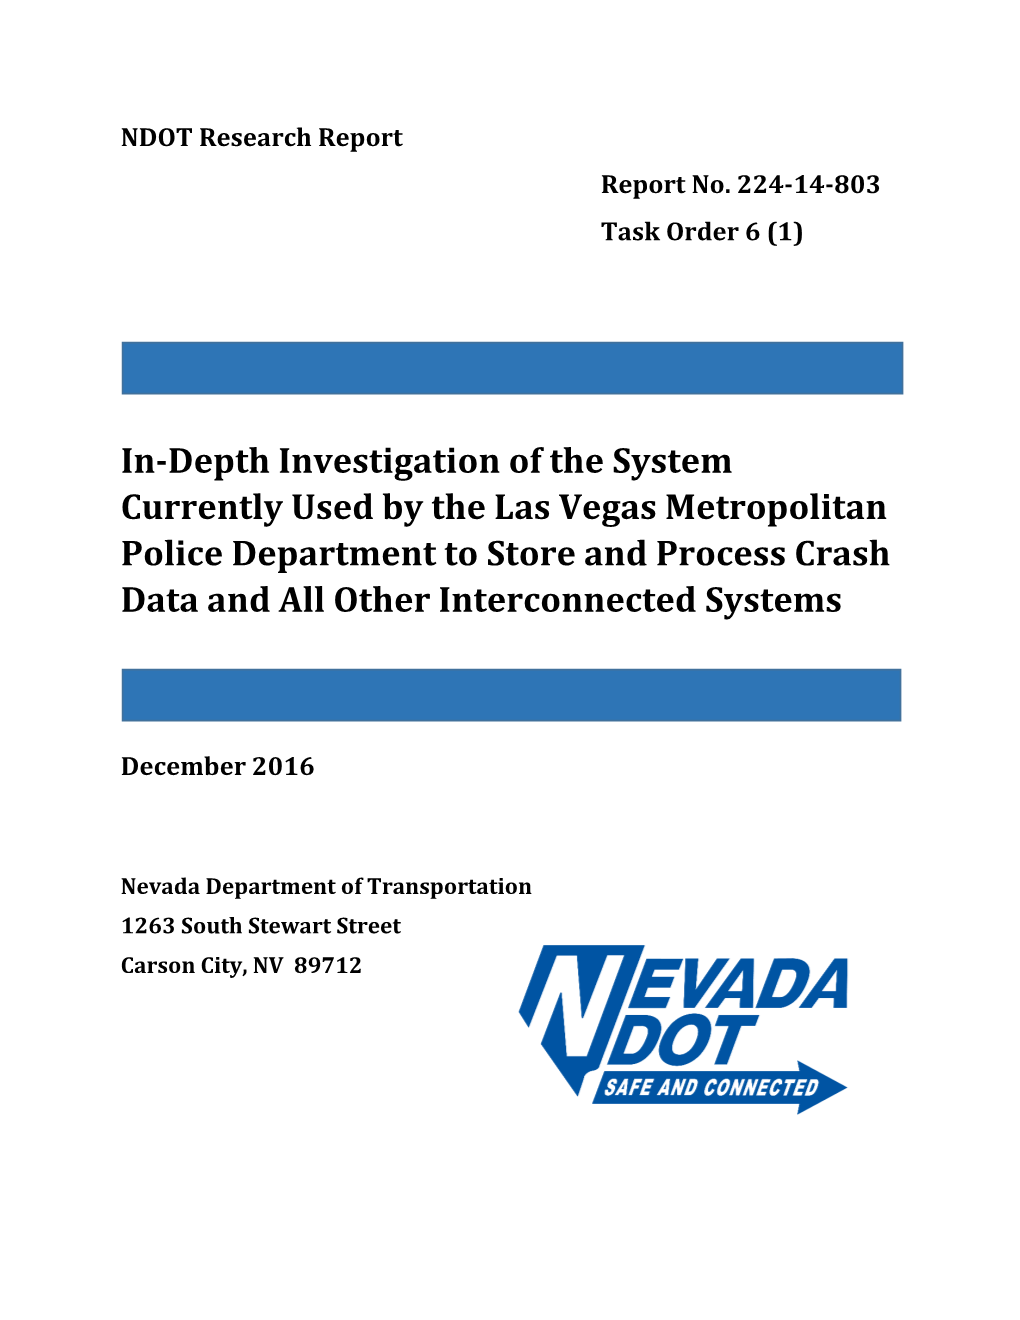 In-Depth Investigation of the System Currently Used by the Las Vegas Metropolitan Police Department to Store and Process Crash D